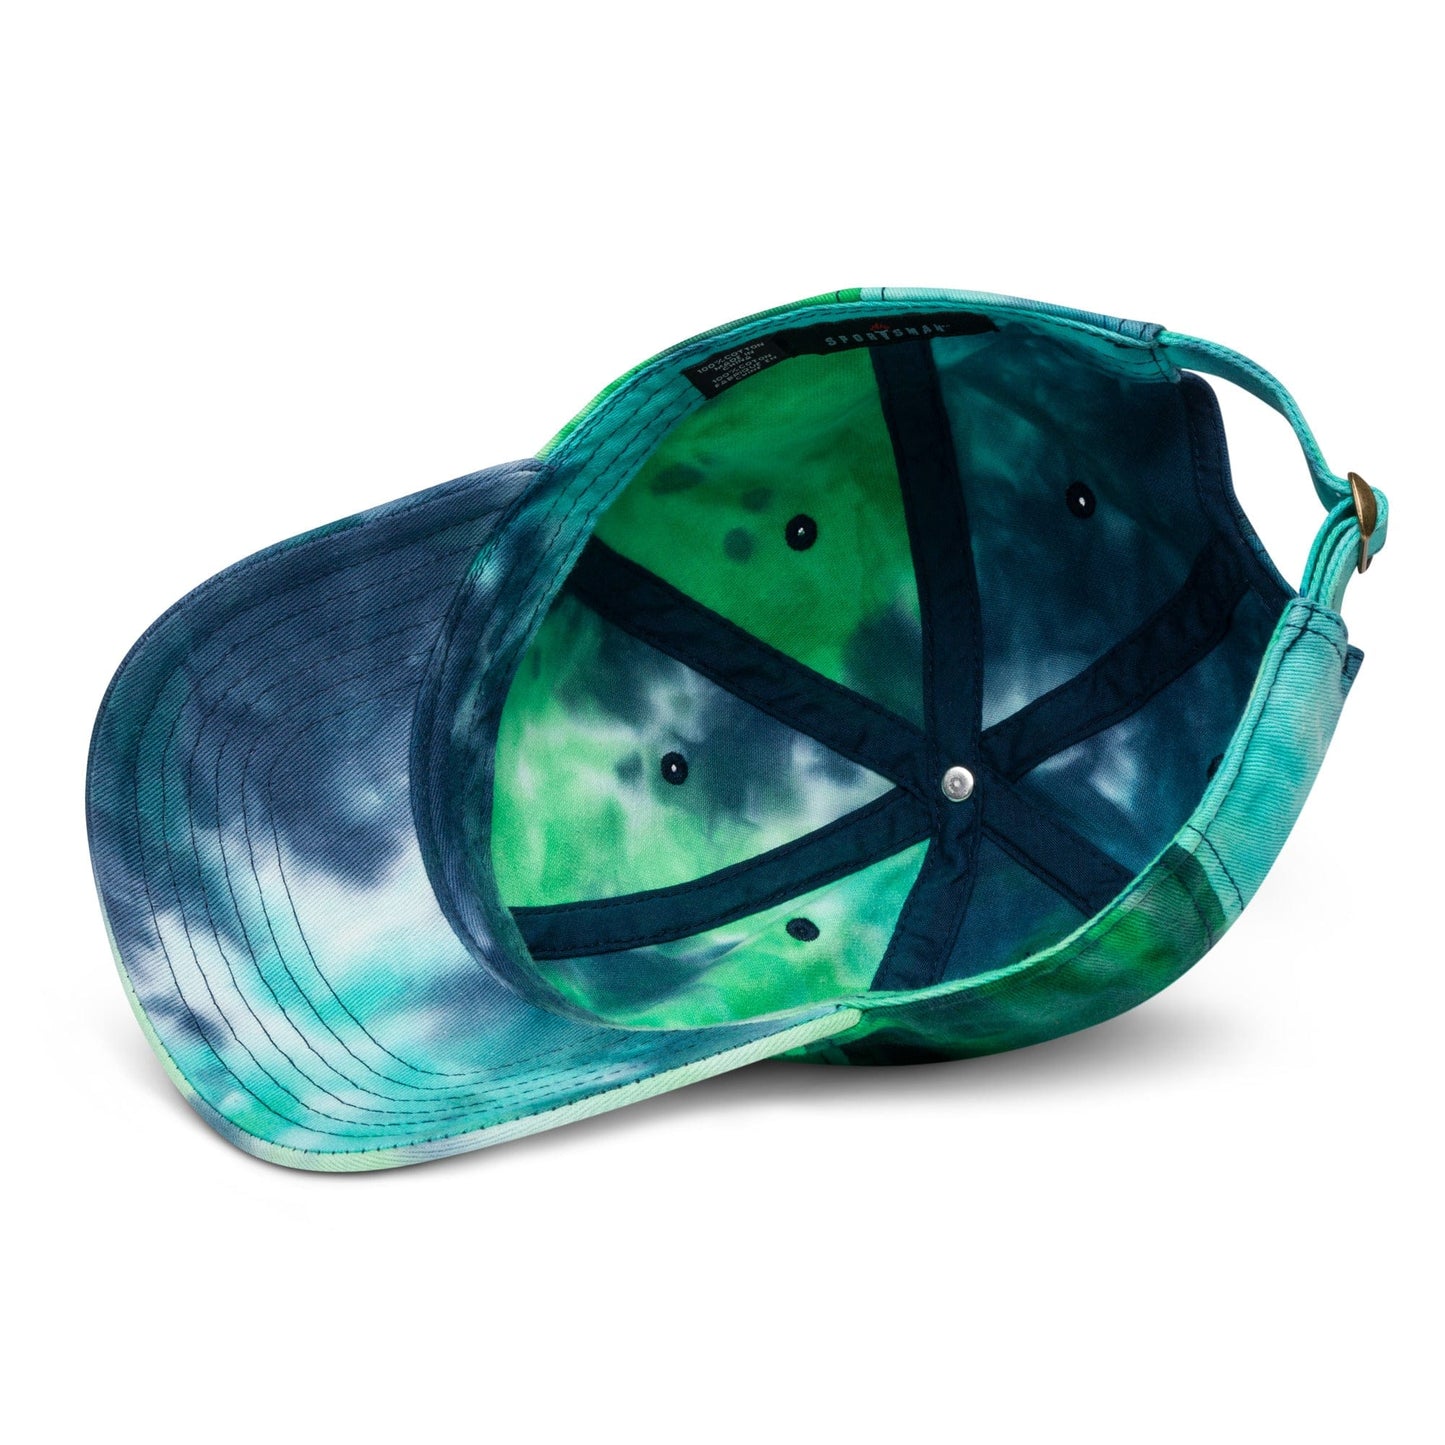 God Vibes Only Tie-Dye Hat